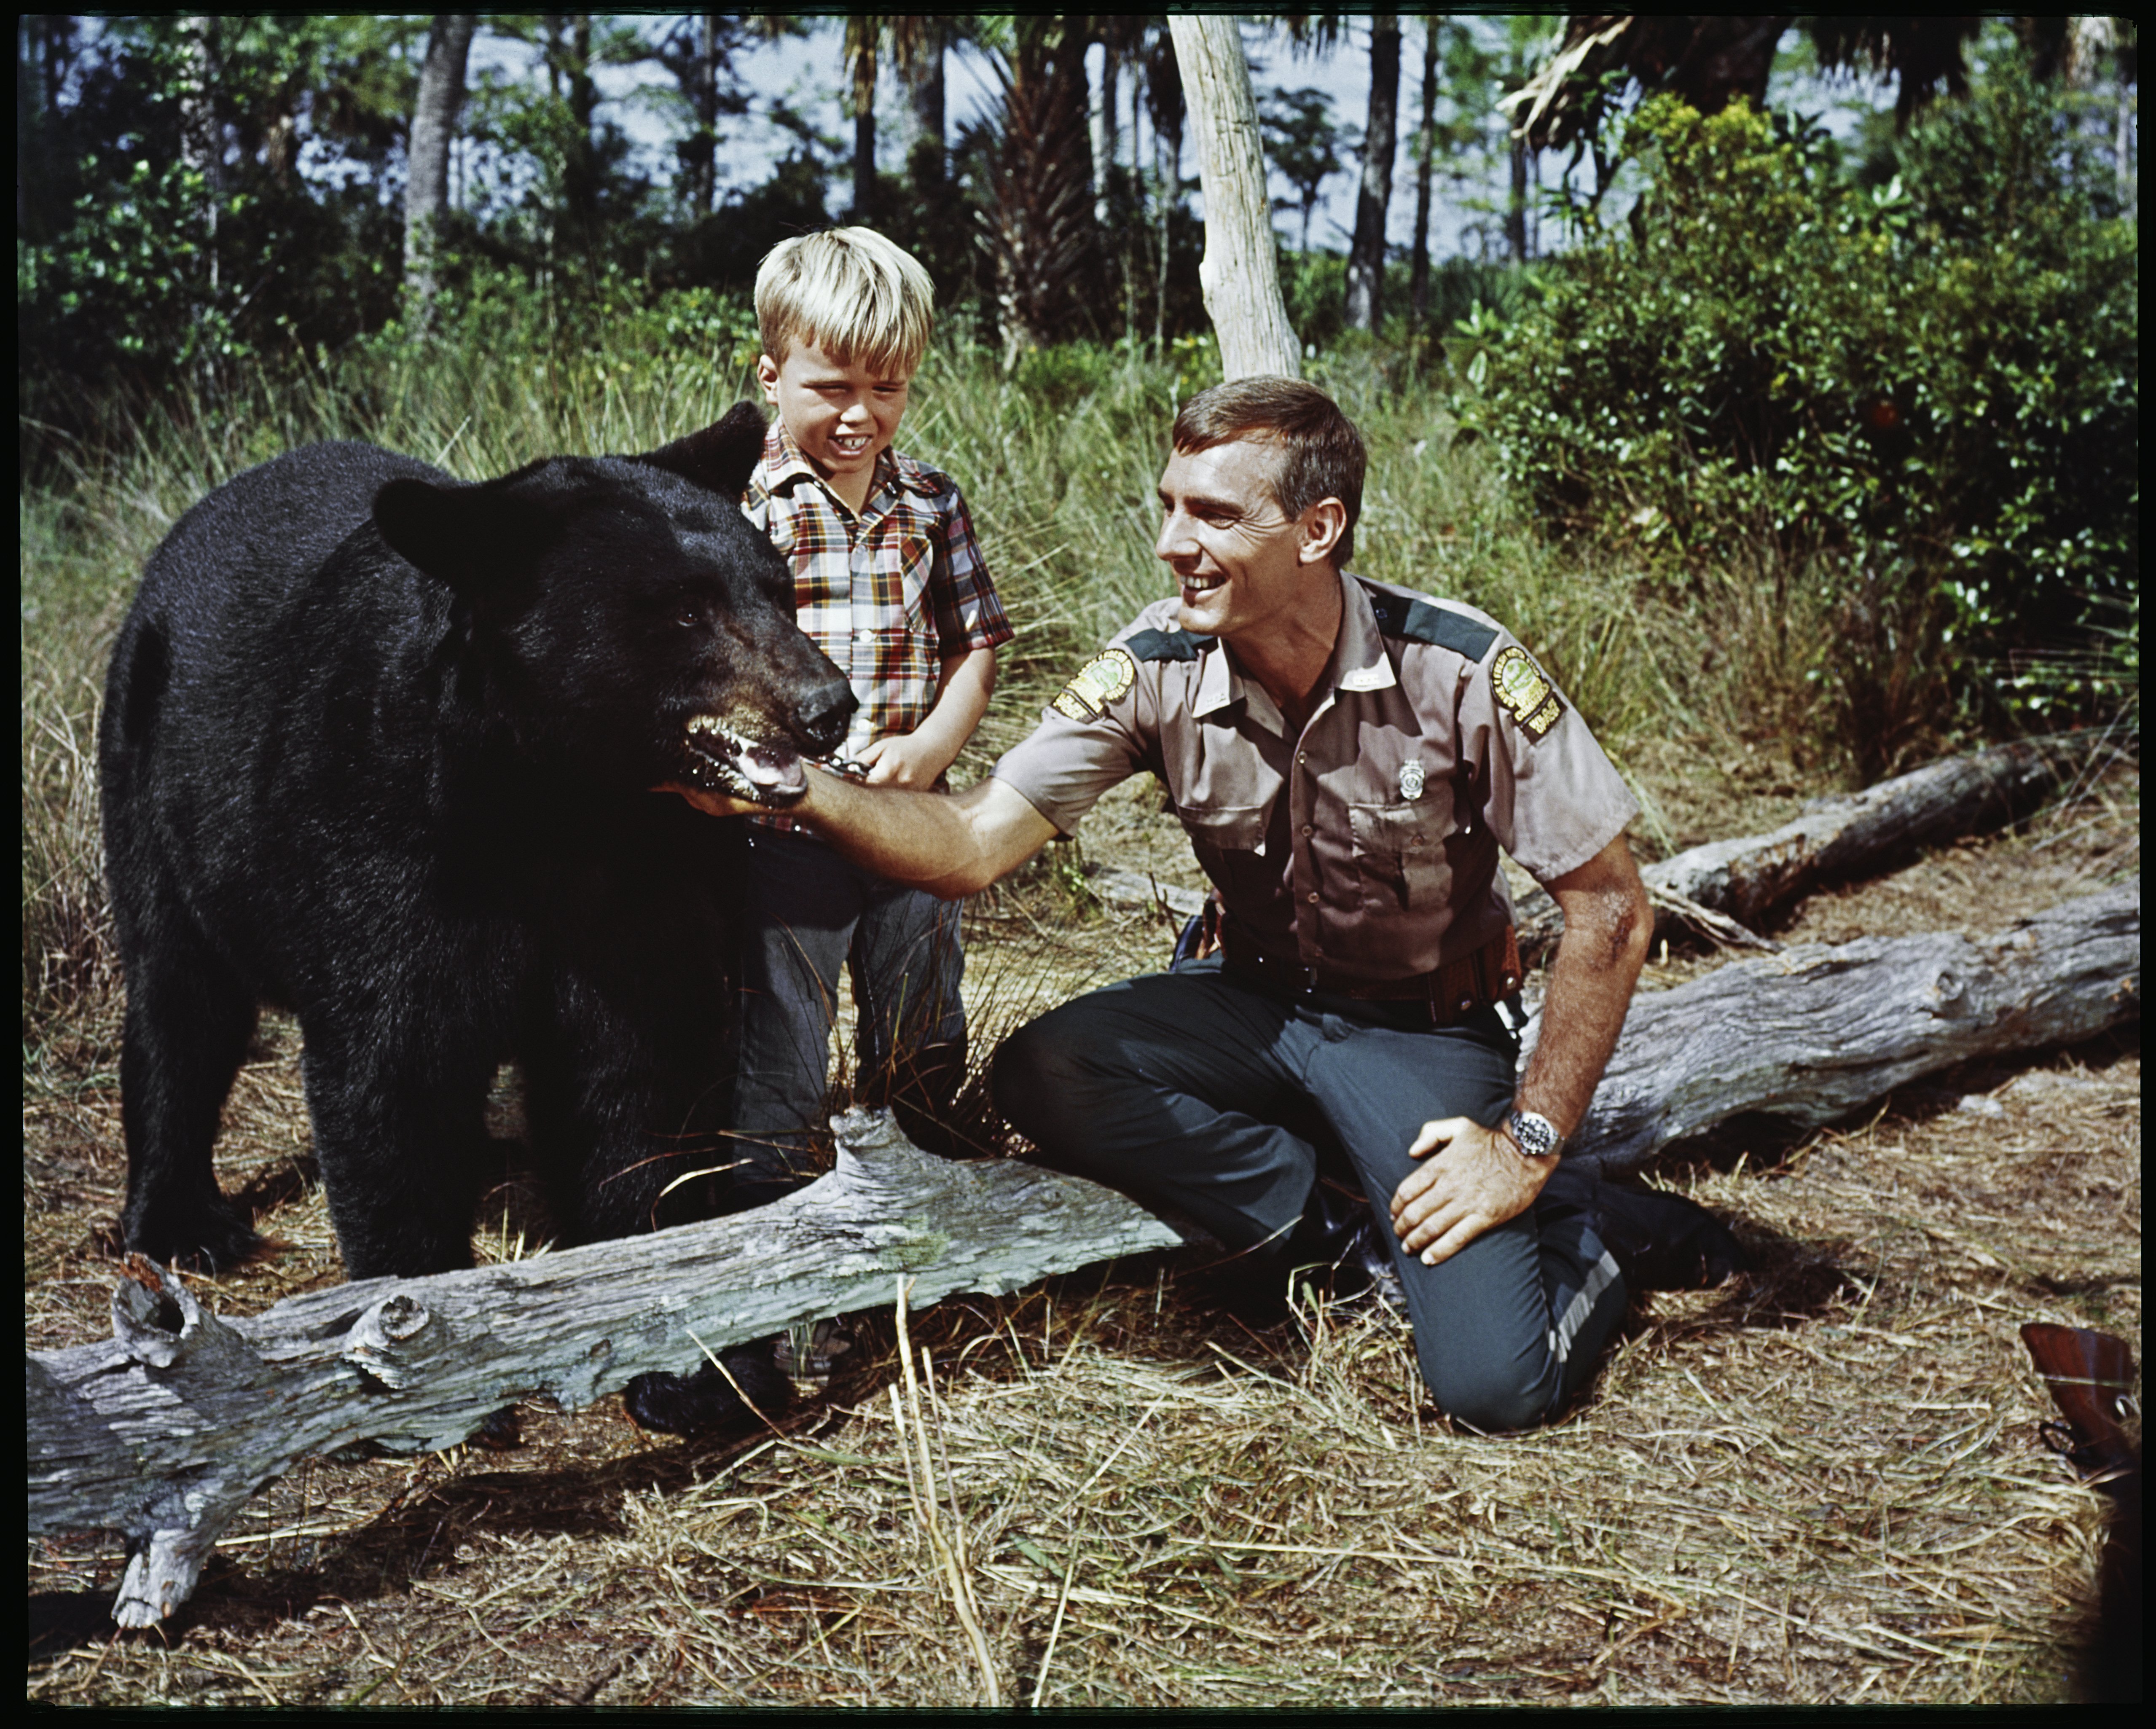 Bear Gentle Ben, child actor Clint Howard, and Dennis Weaver in a scene from the film "Gentle Giant" in 1967 | Photo: Camerique/Getty Images